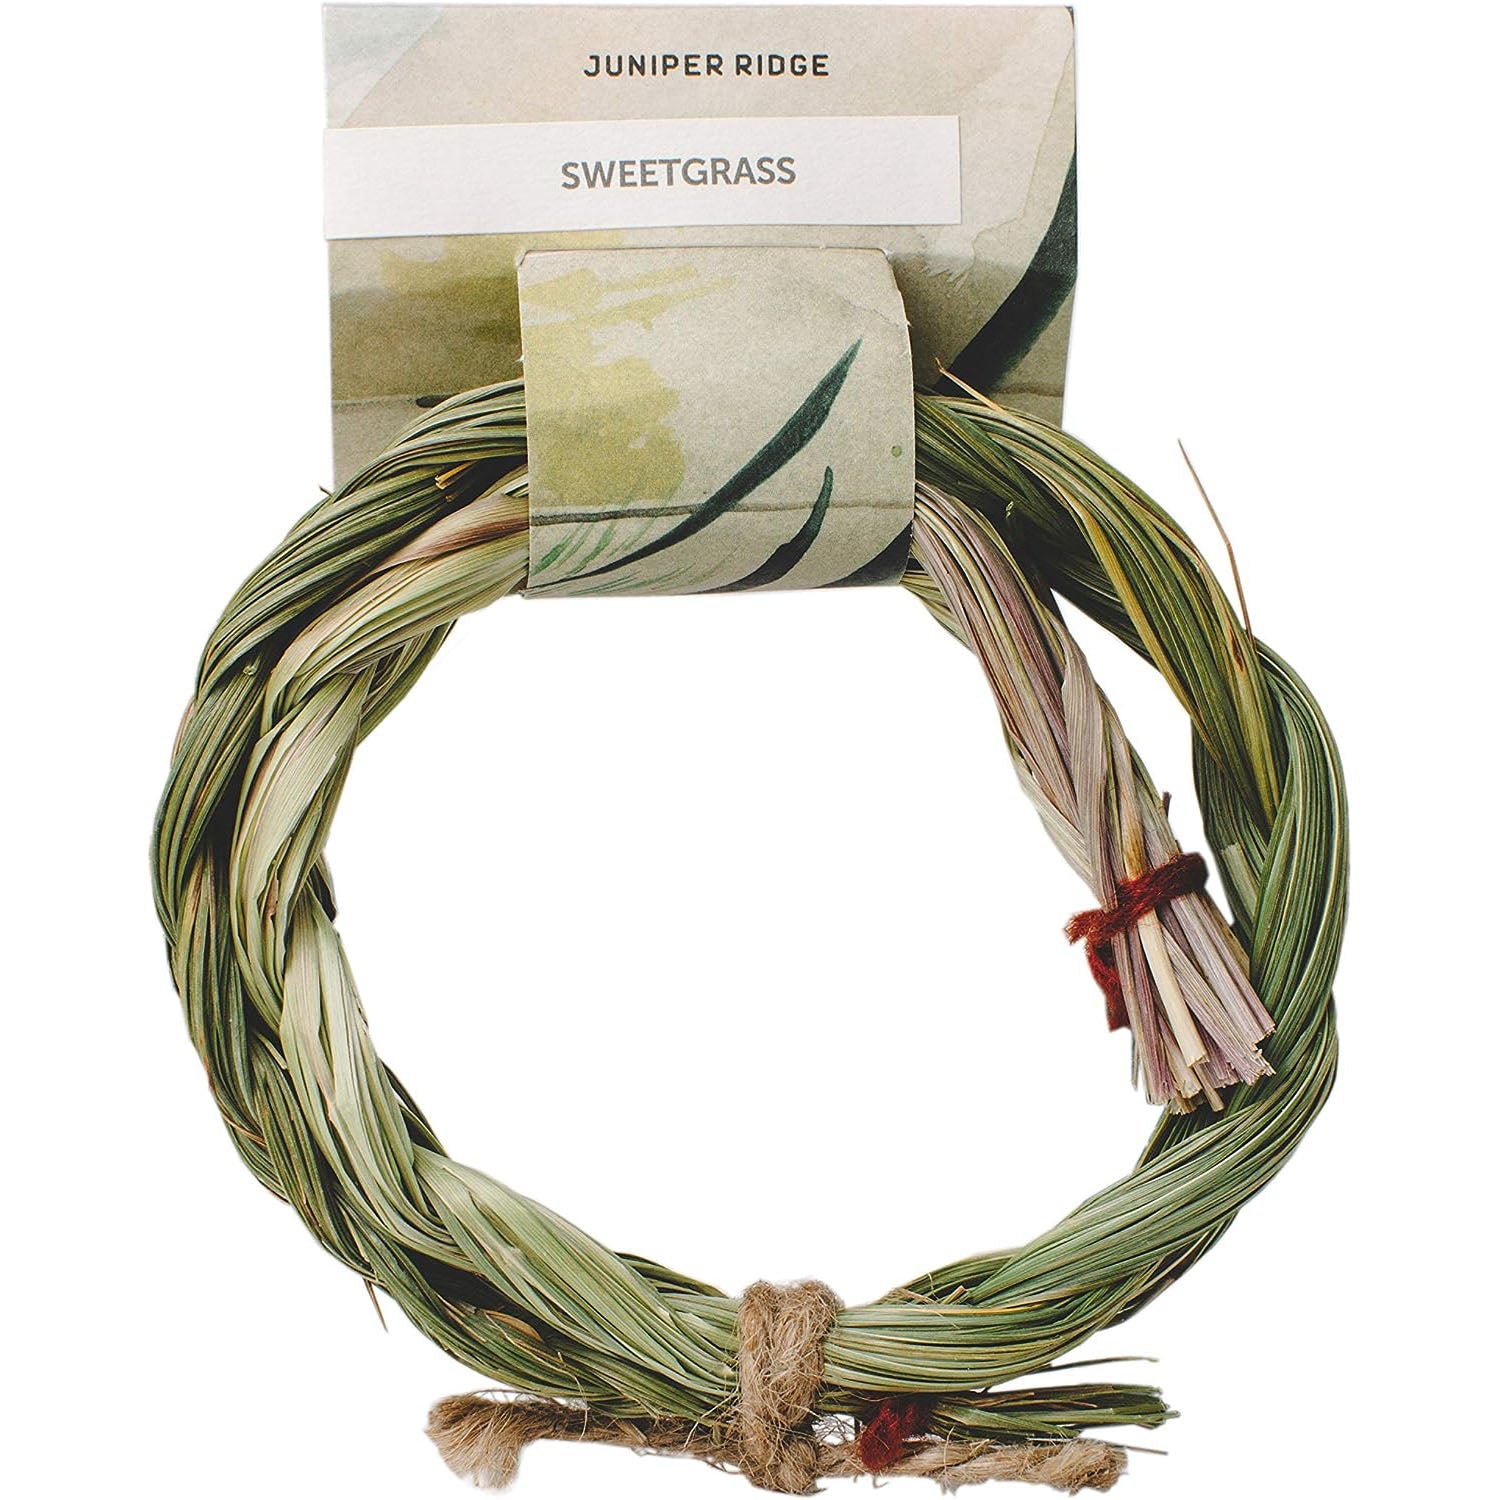 Authentic Ojibwe Indian Sweet Grass Braid Smudge Incense Purify